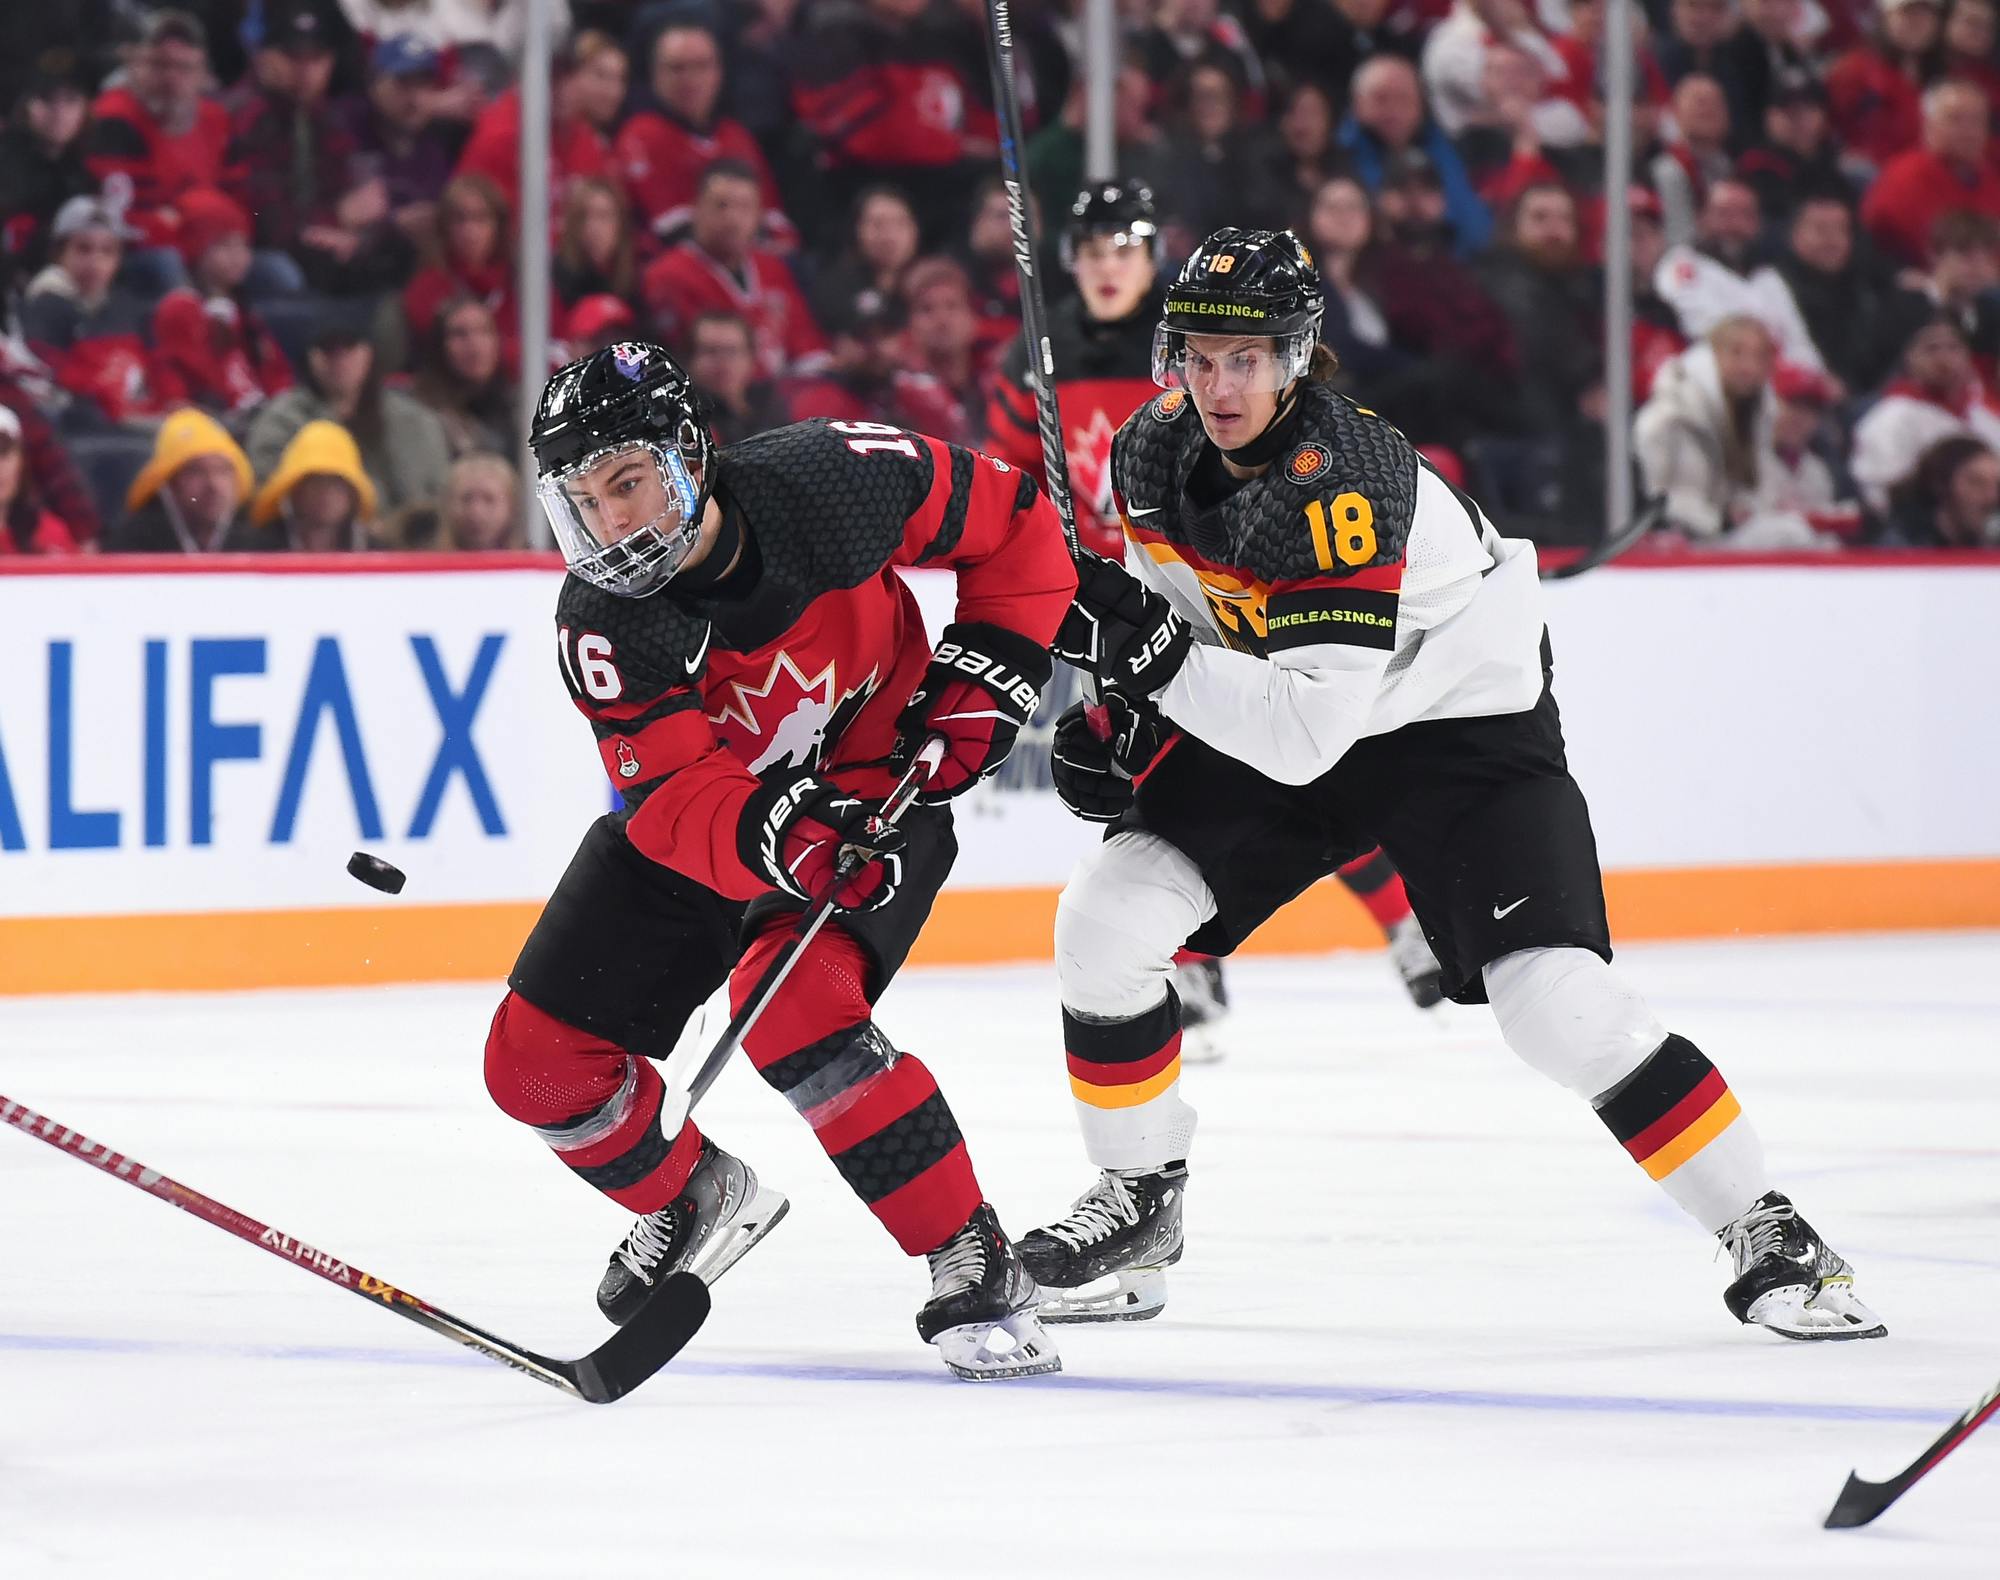 Hockey Night in Canada on X: WHAT A GAME, WHAT A FINISH 👏 Dylan Guenther  with with the golden goal for Canada at the 2023 #WorldJuniors 🇨🇦🥇   / X